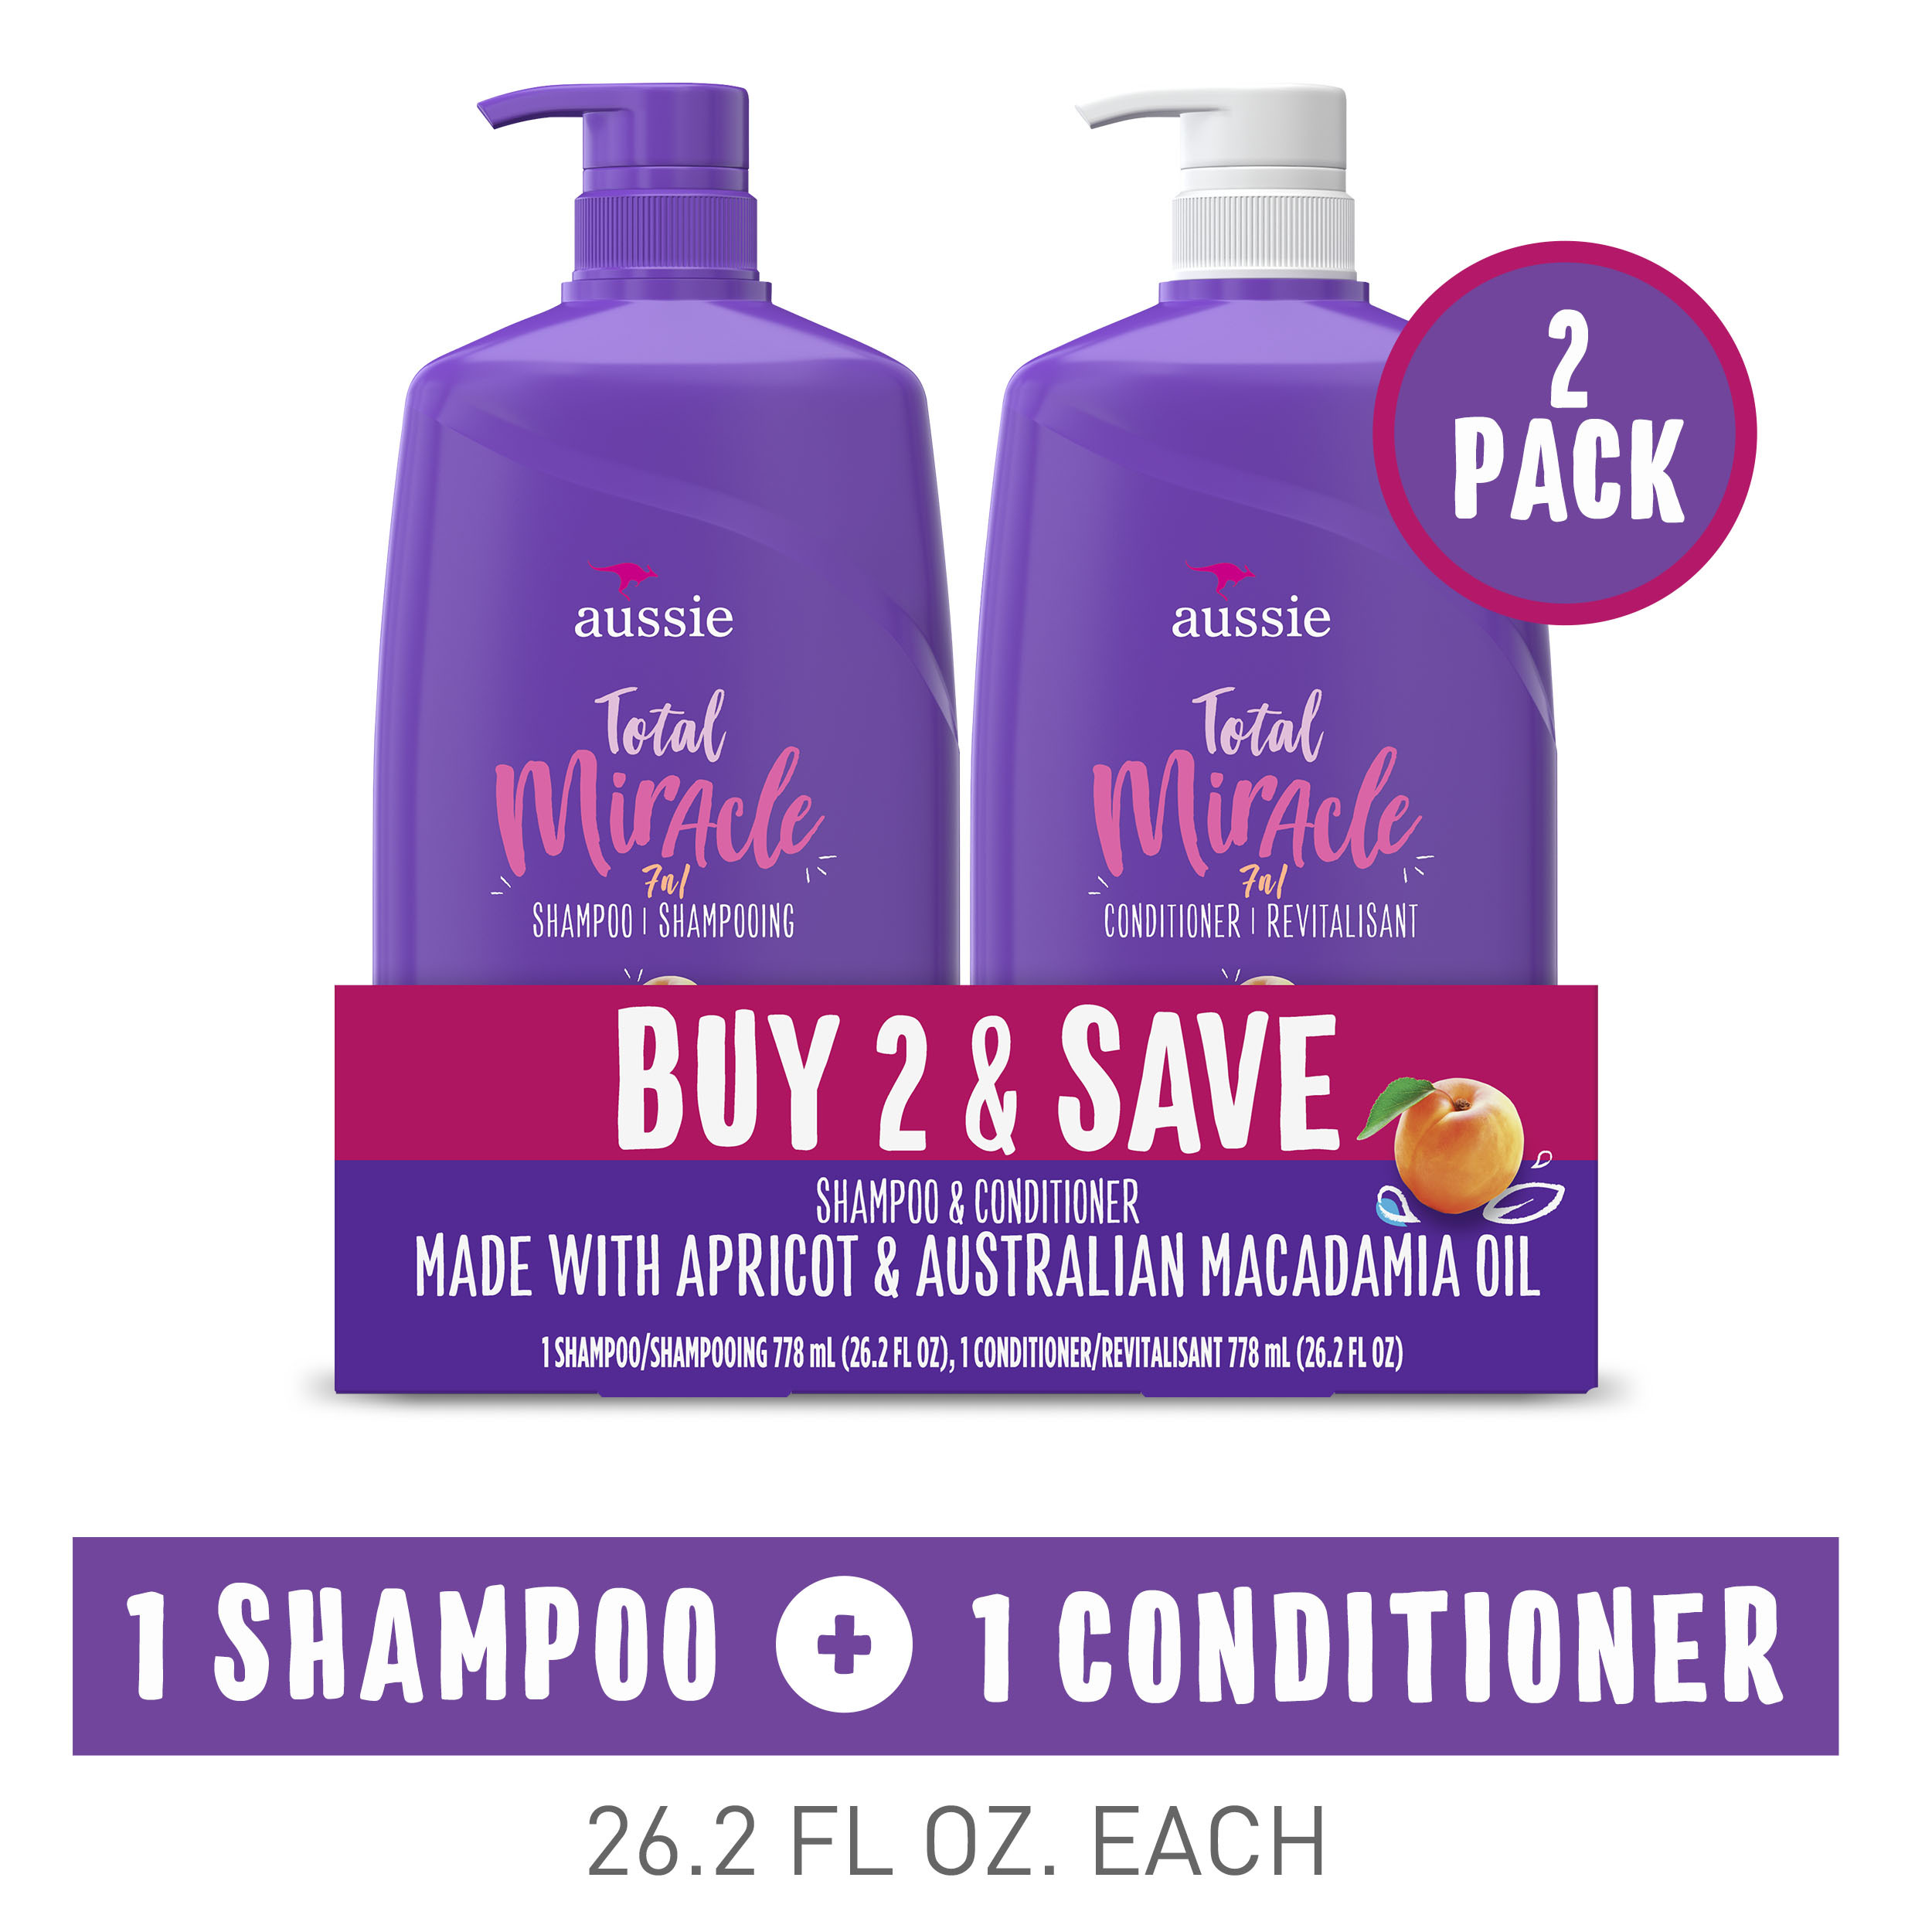 Aussie Total Miracle Apricot & Macadamia Oil, Shampoo & Conditioner Pack, All Hair Types, 26.2 fl oz - image 1 of 10